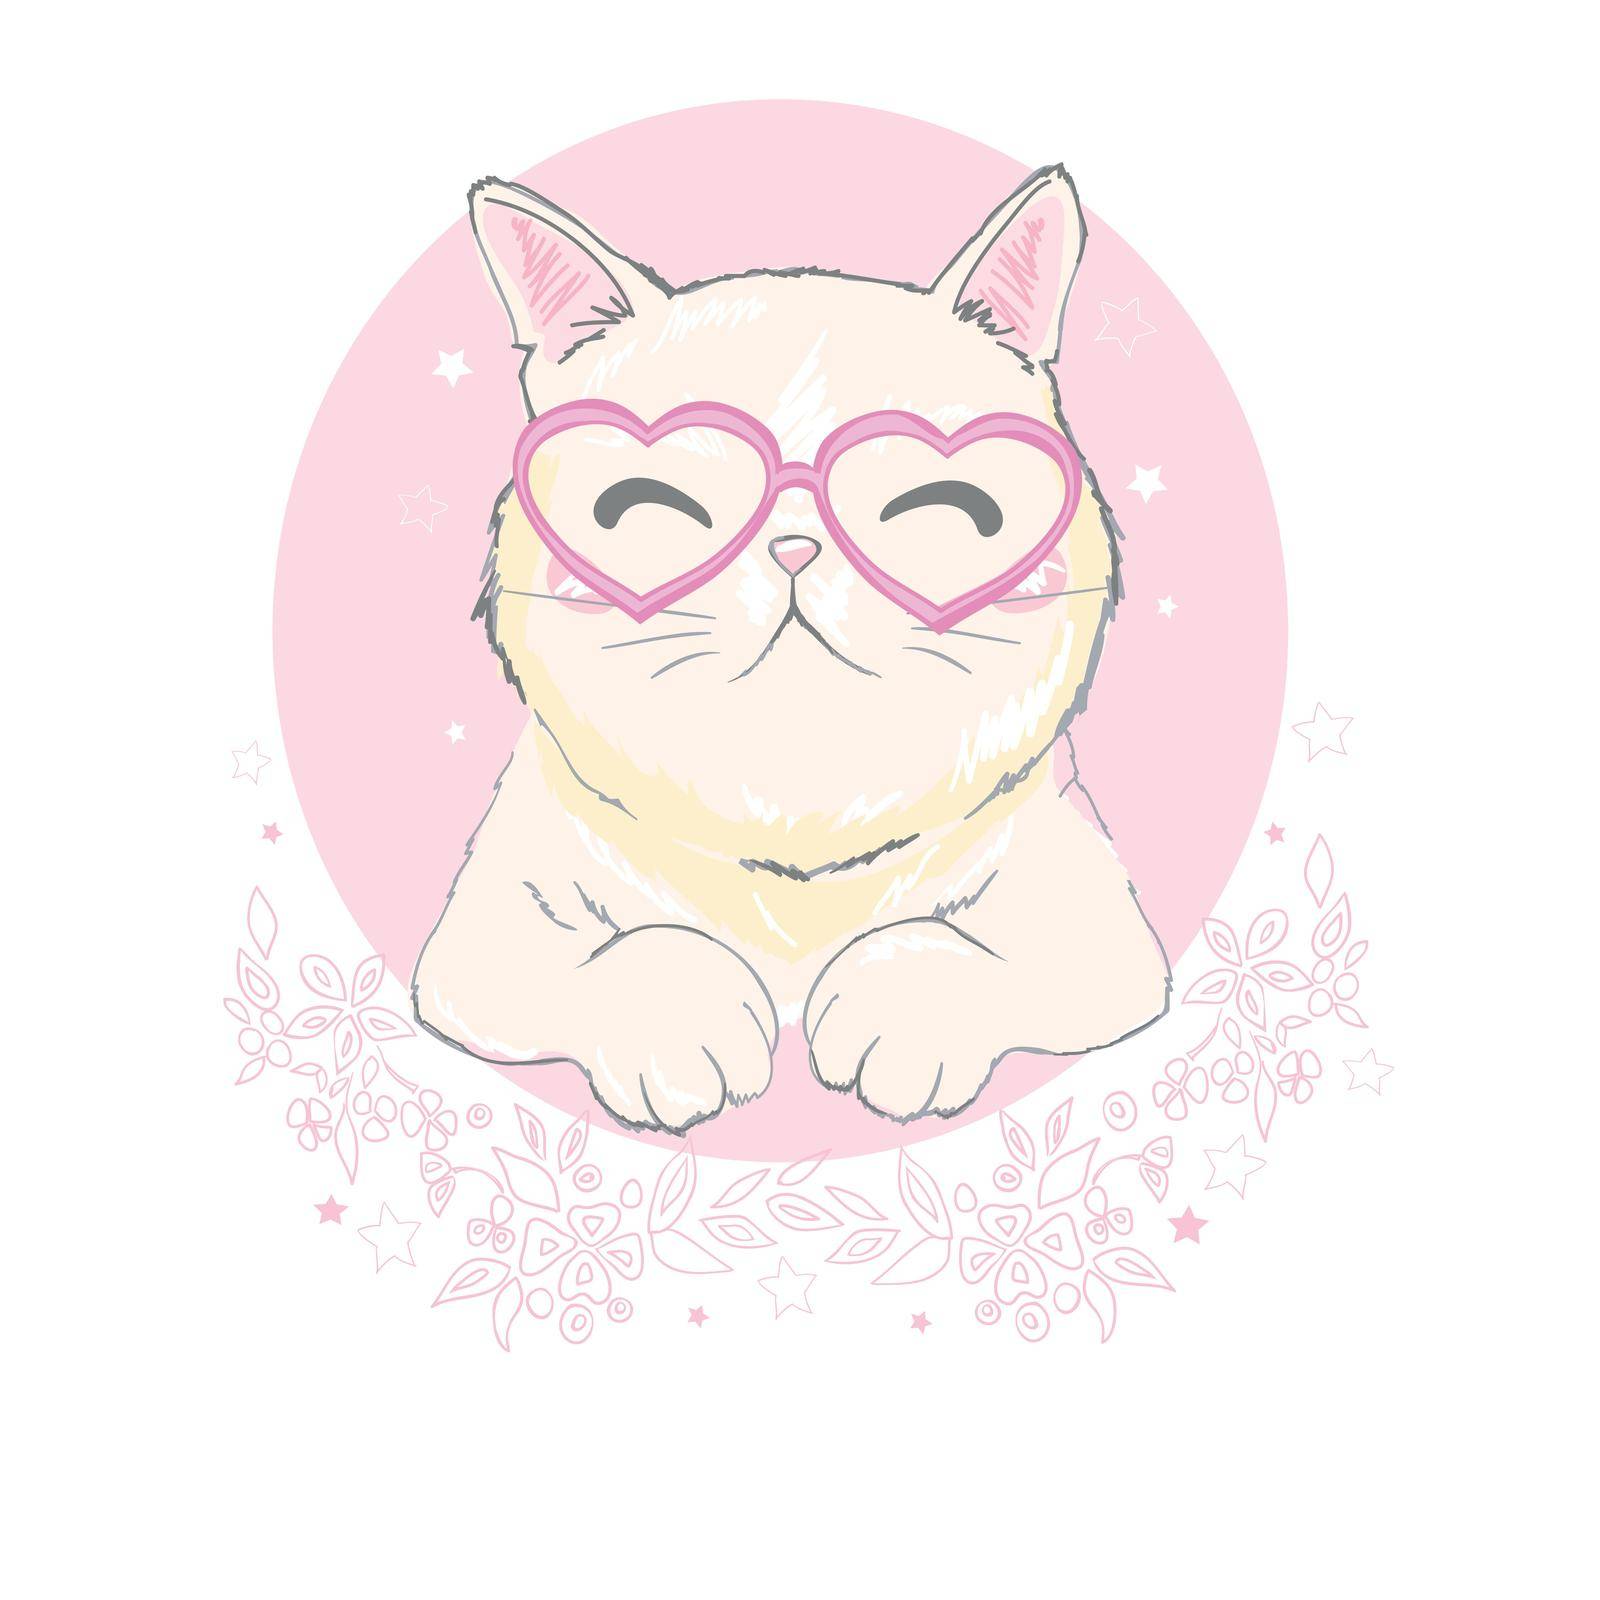 ute cat with glasses design. Kids illustrations for school books and more.